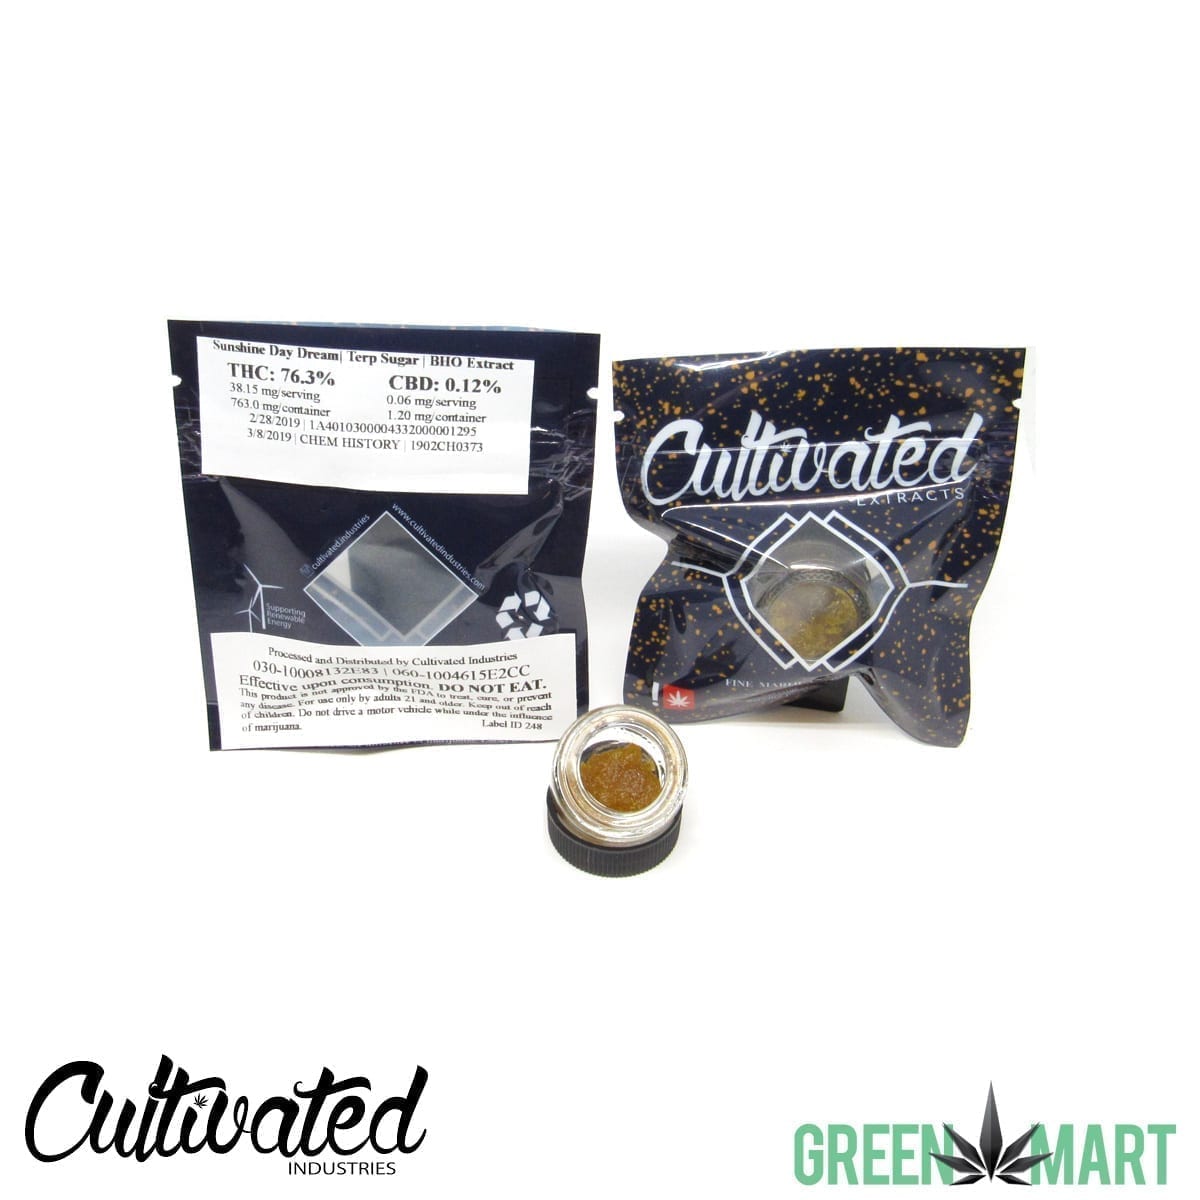 Cultivated Extracts - Sunshine Daydream Terp Sugar